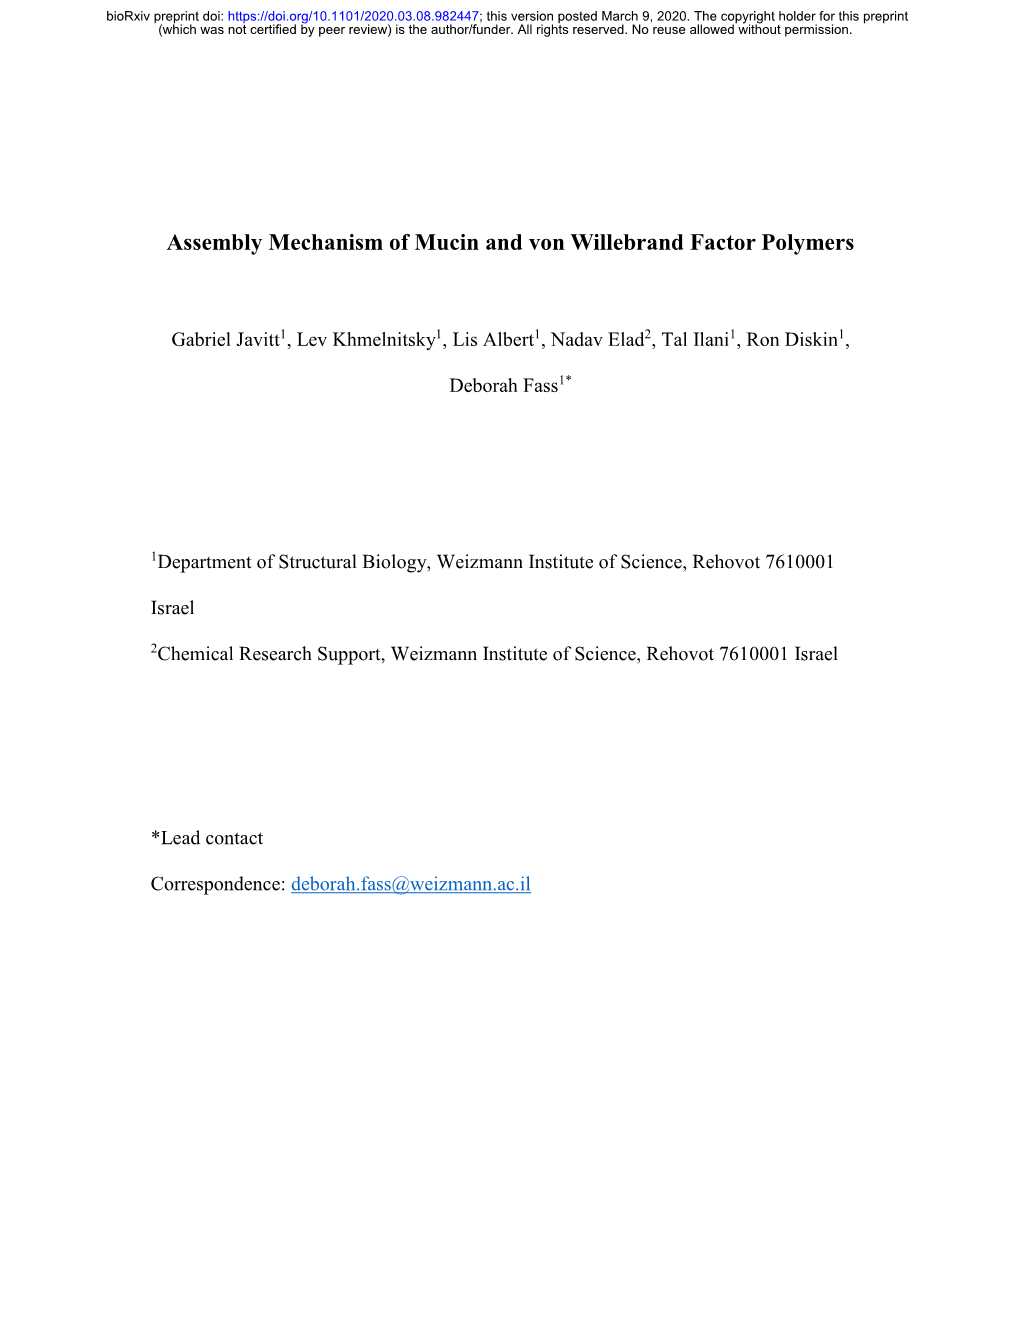 Assembly Mechanism of Mucin and Von Willebrand Factor Polymers